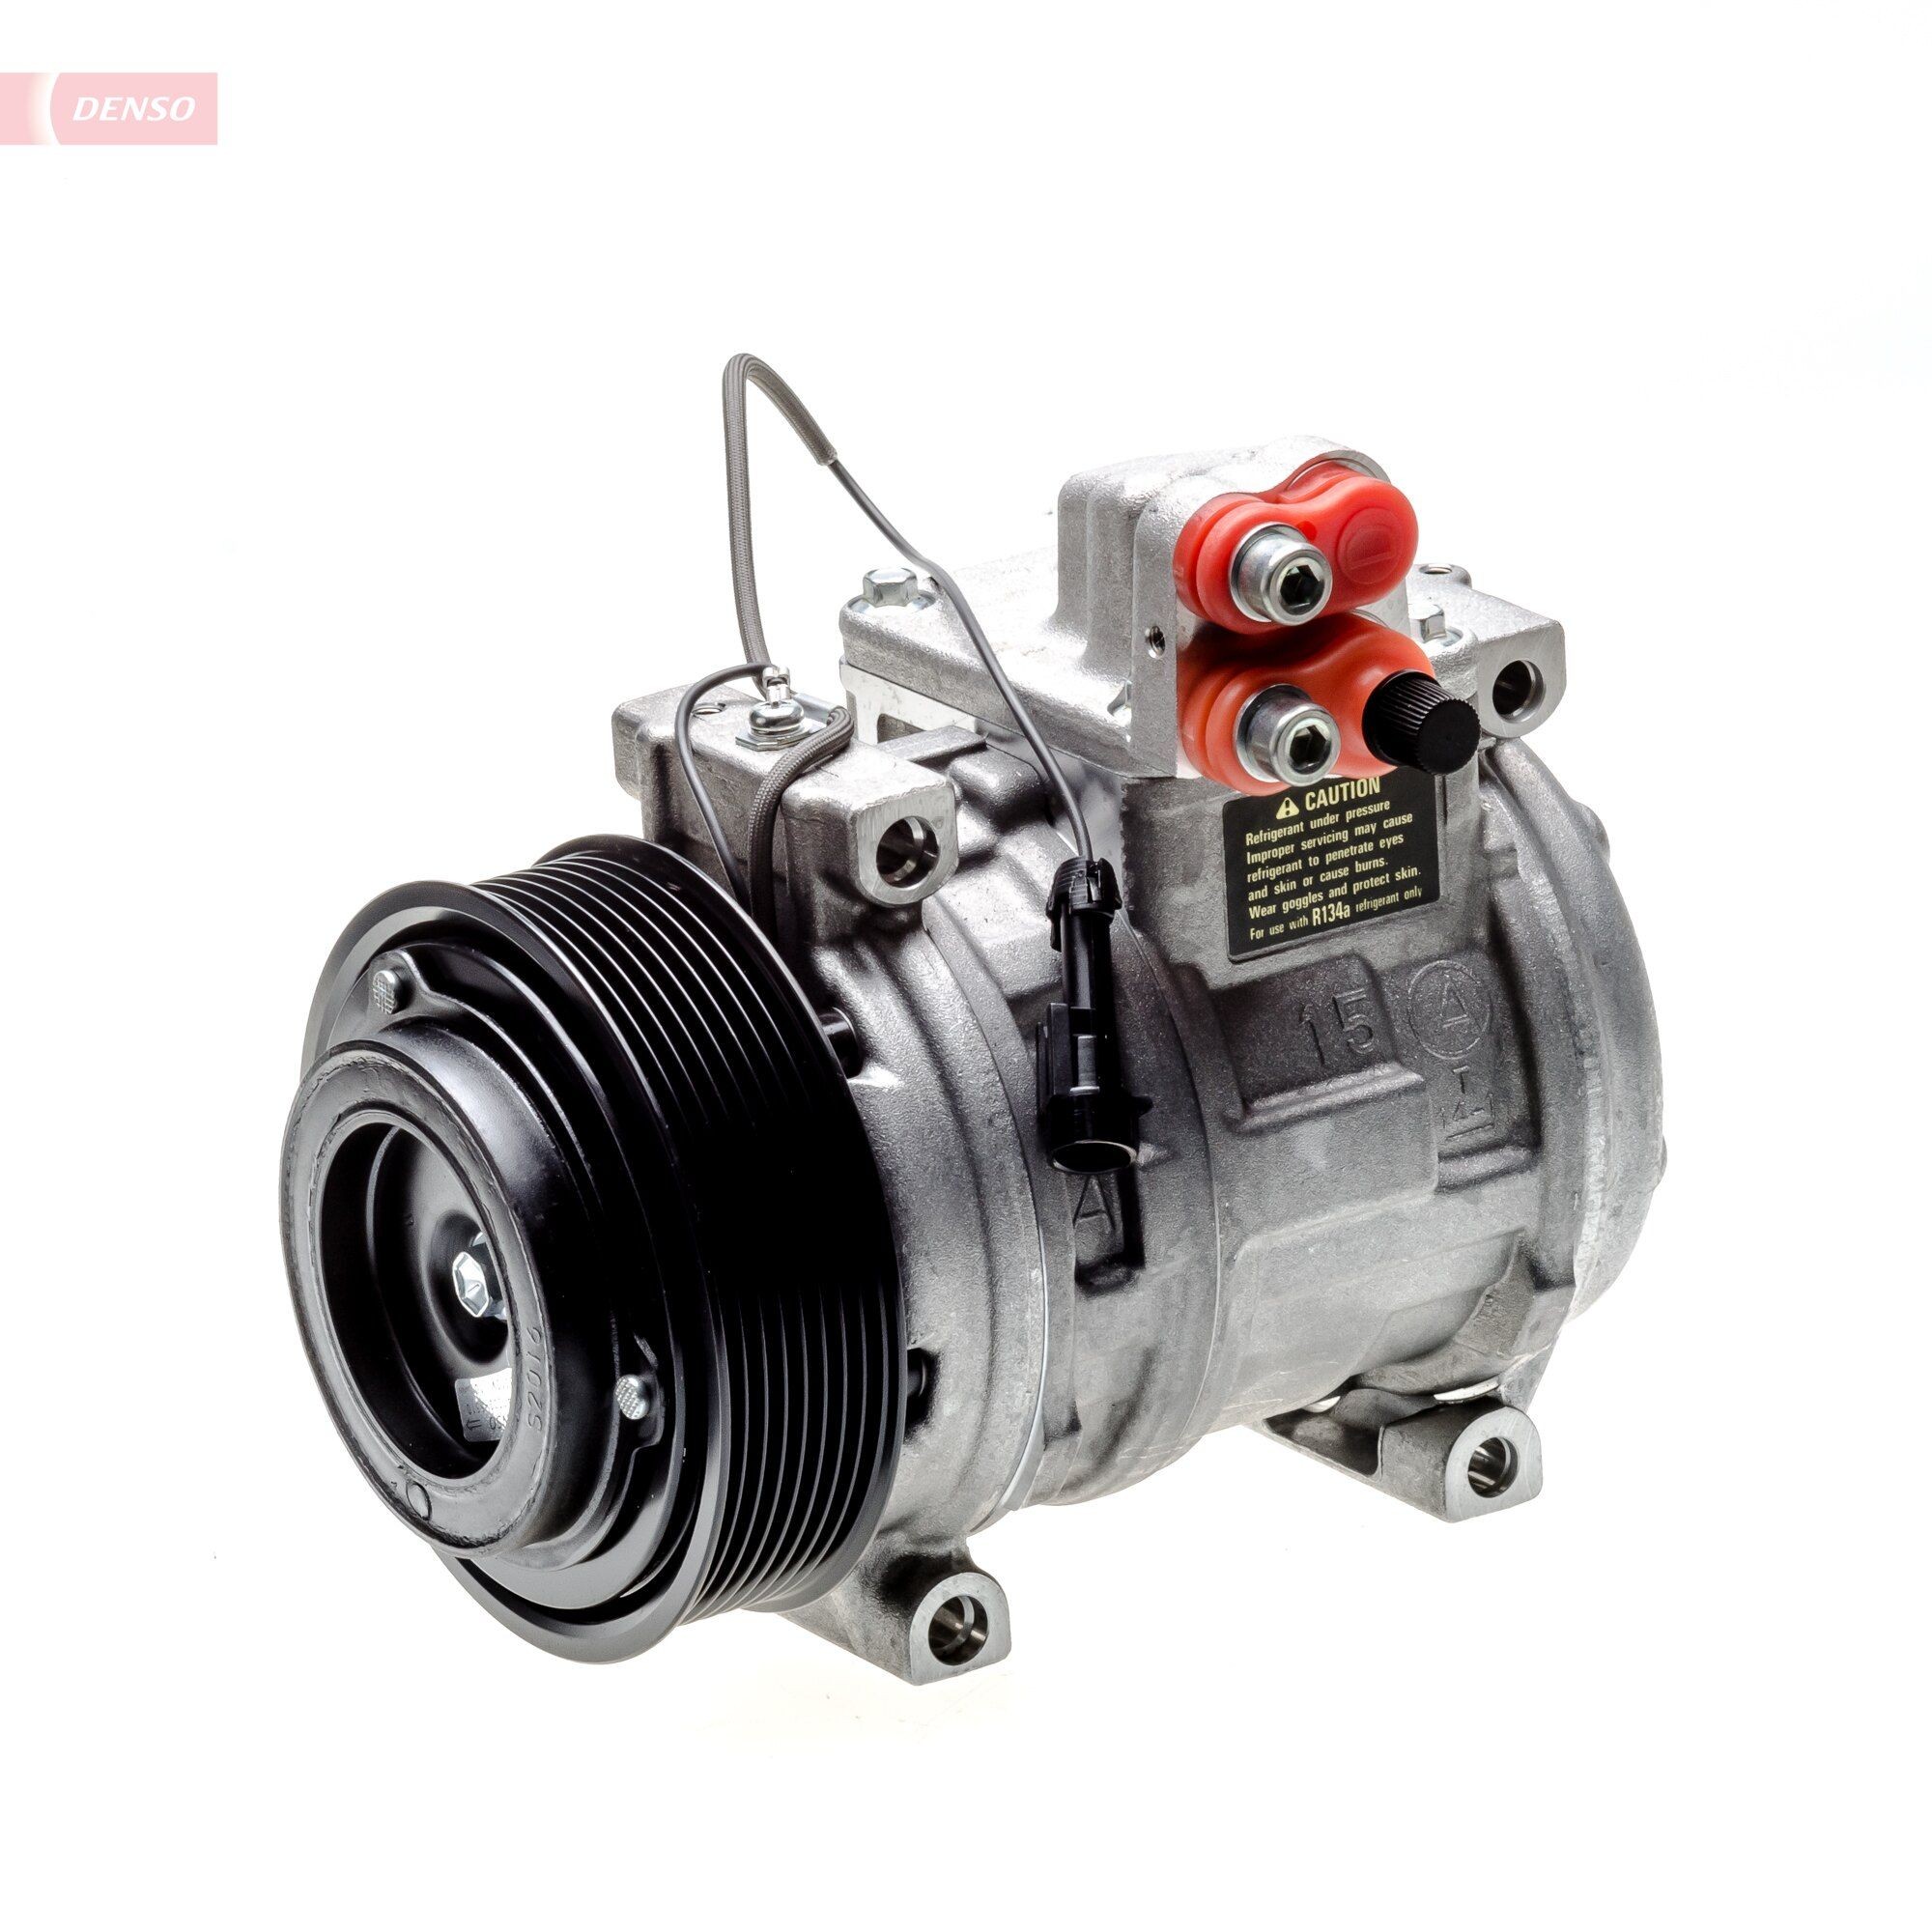 DENSO 10PA15C, 12V, PAG 46, R 134a, with magnetic clutch Belt Pulley Ø: 120mm, Number of grooves: 8 AC compressor DCP99505 buy